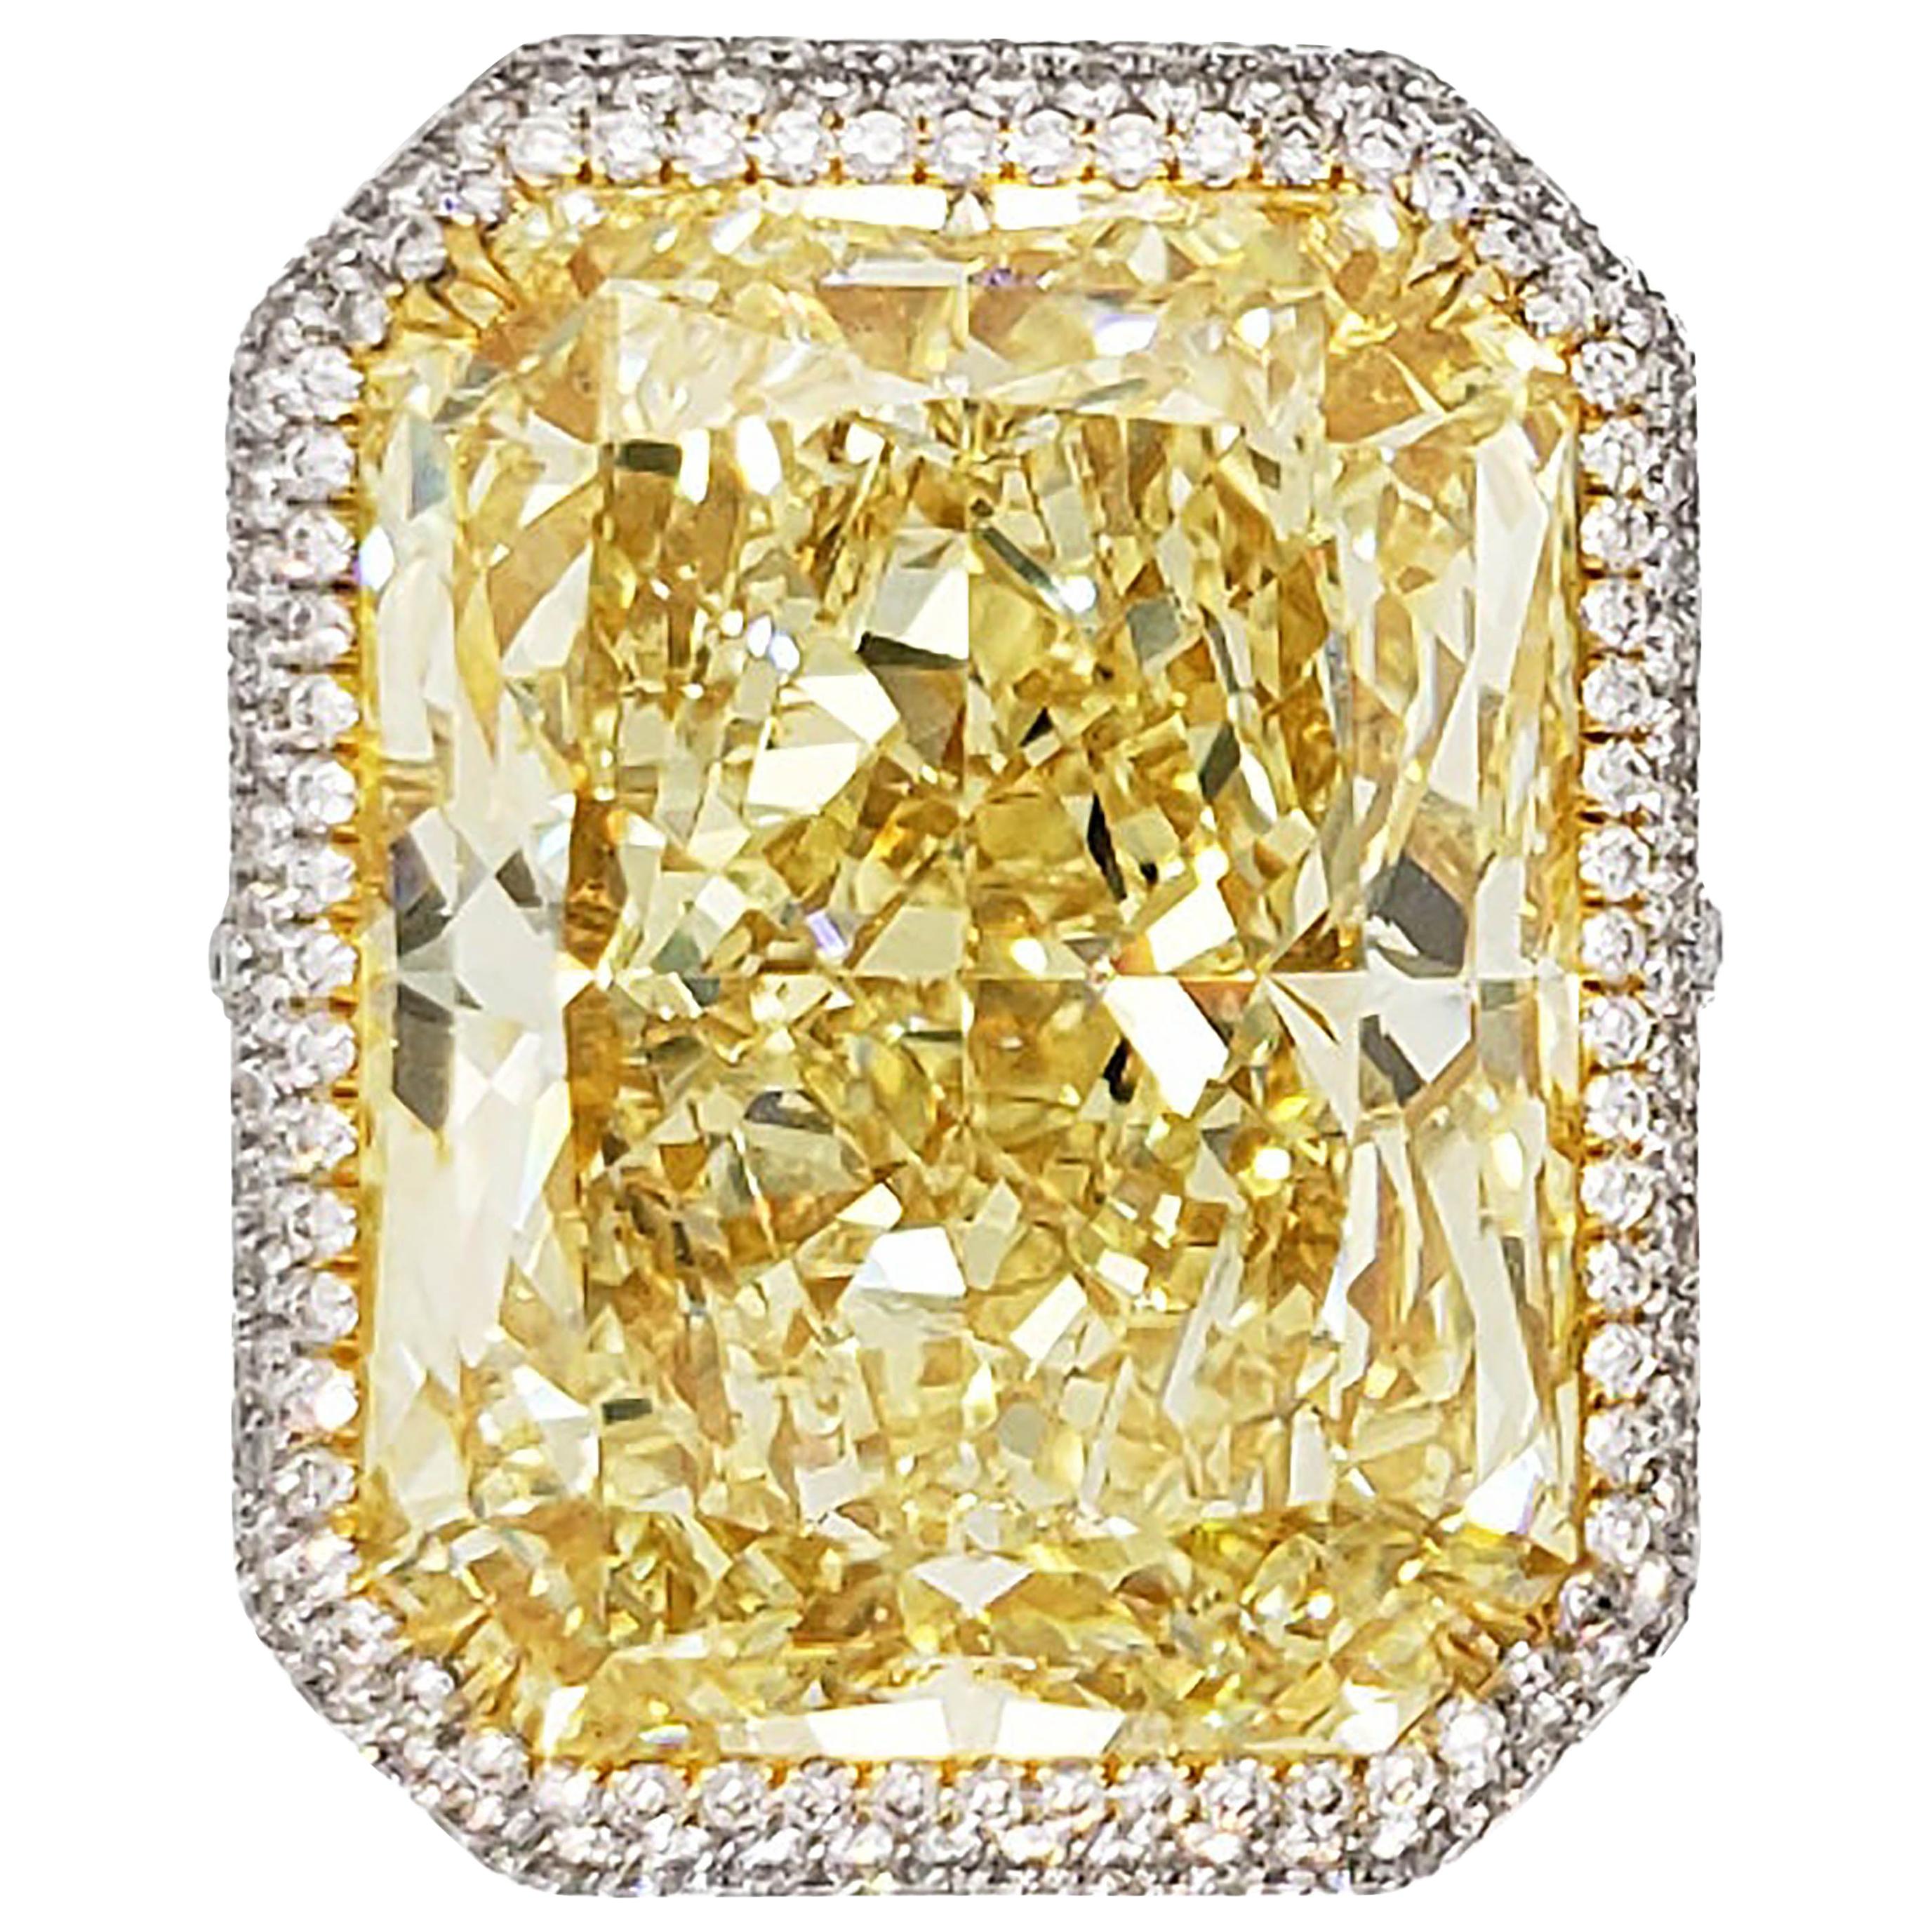 Scarselli 31 Carat Natural Fancy Yellow Diamond Ring VS1 Clarity in Platinum GIA